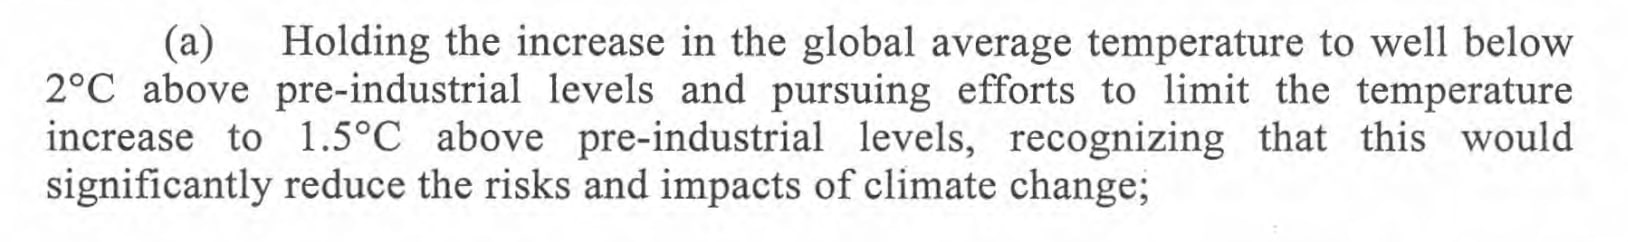 Holding the increase in the global average temperature to well below 2°C above pre-industrial levels and pursuing efforts to limit the temperature increase to 1.5°C above pre-industrial levels, recognizing that this would significantly reduce the risks and impacts of climate change;